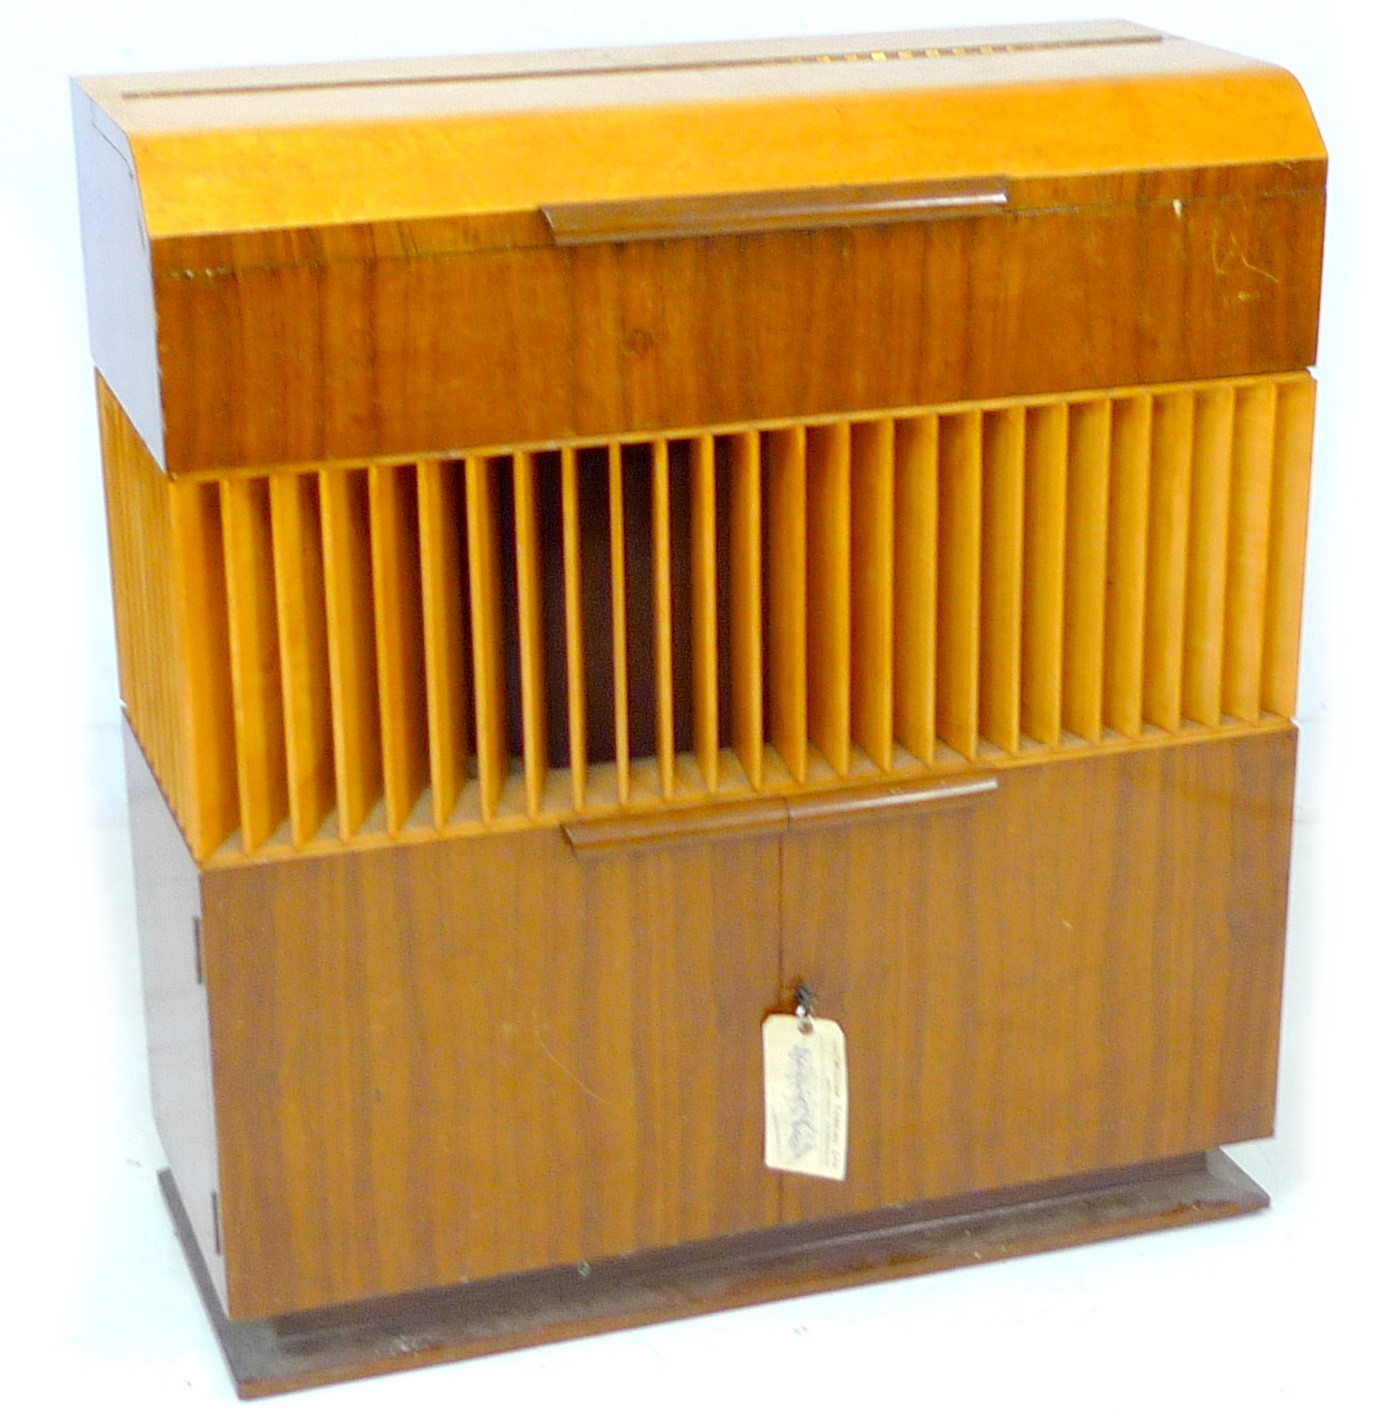 A vintage 'Decola' radiogram, by The Decca Record Company Limited, Rd. Desn. 844055, 'Decola' No.